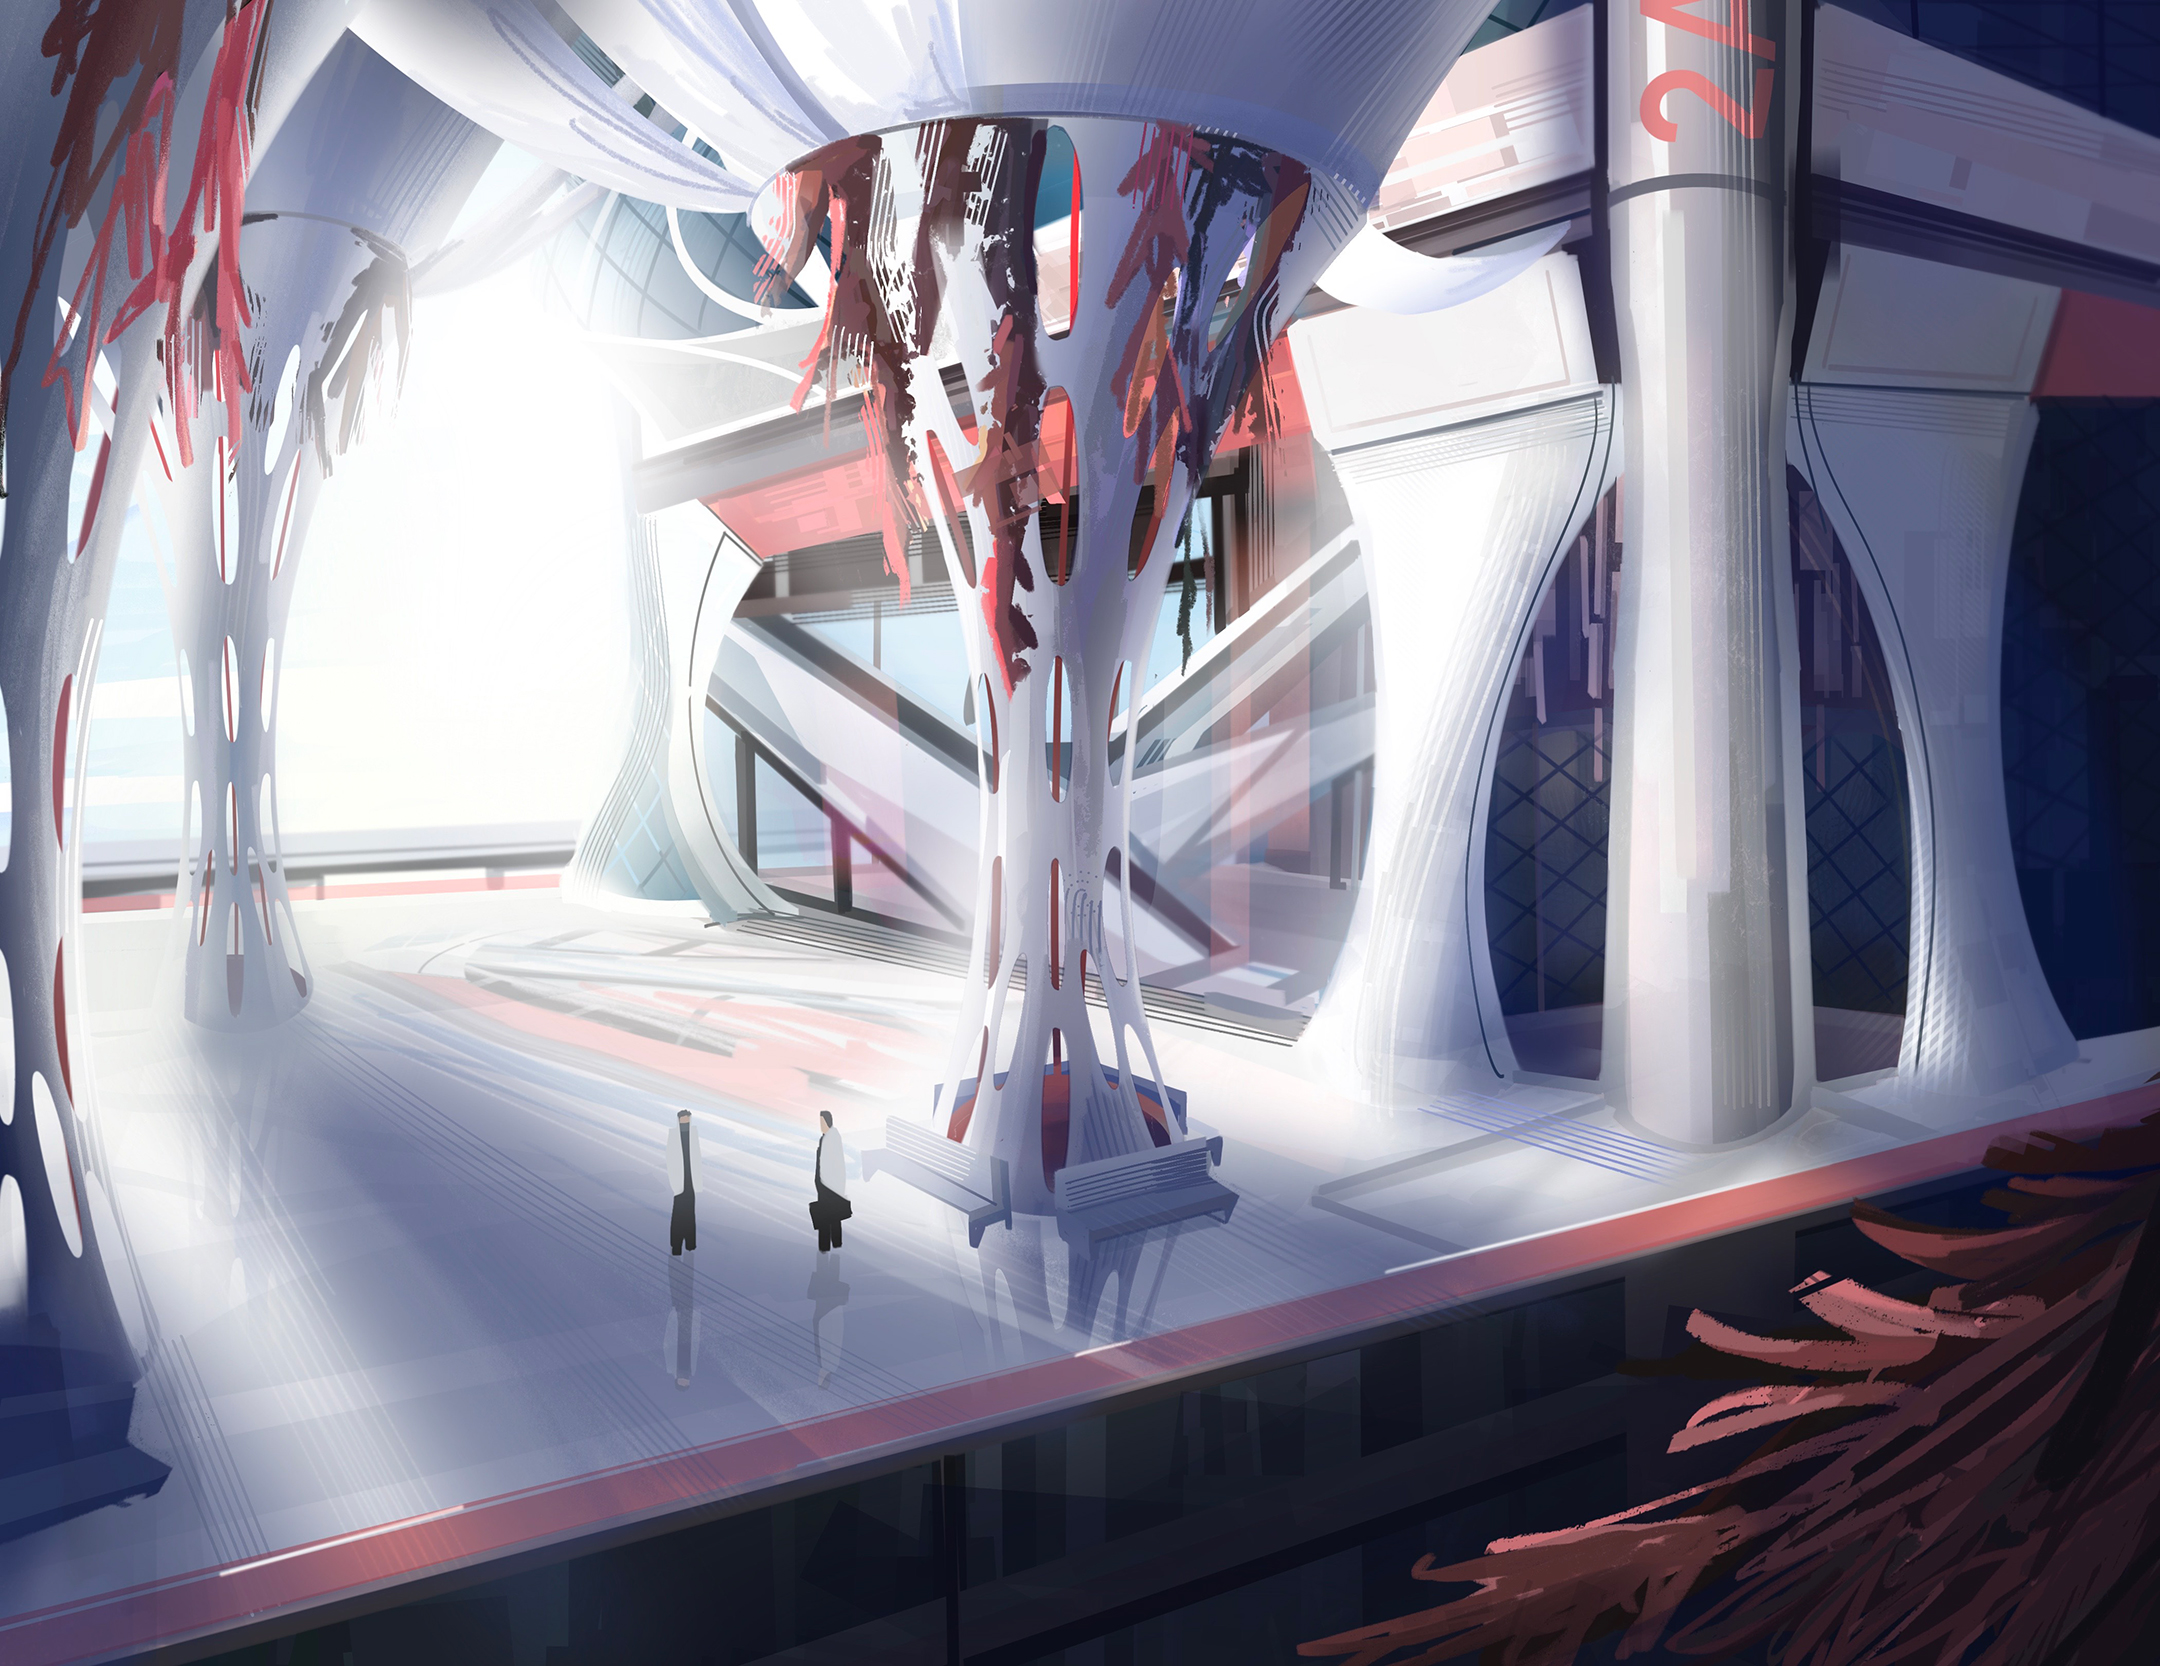 digital illustration depicting two men standing on a subway platform in a futuristic setting